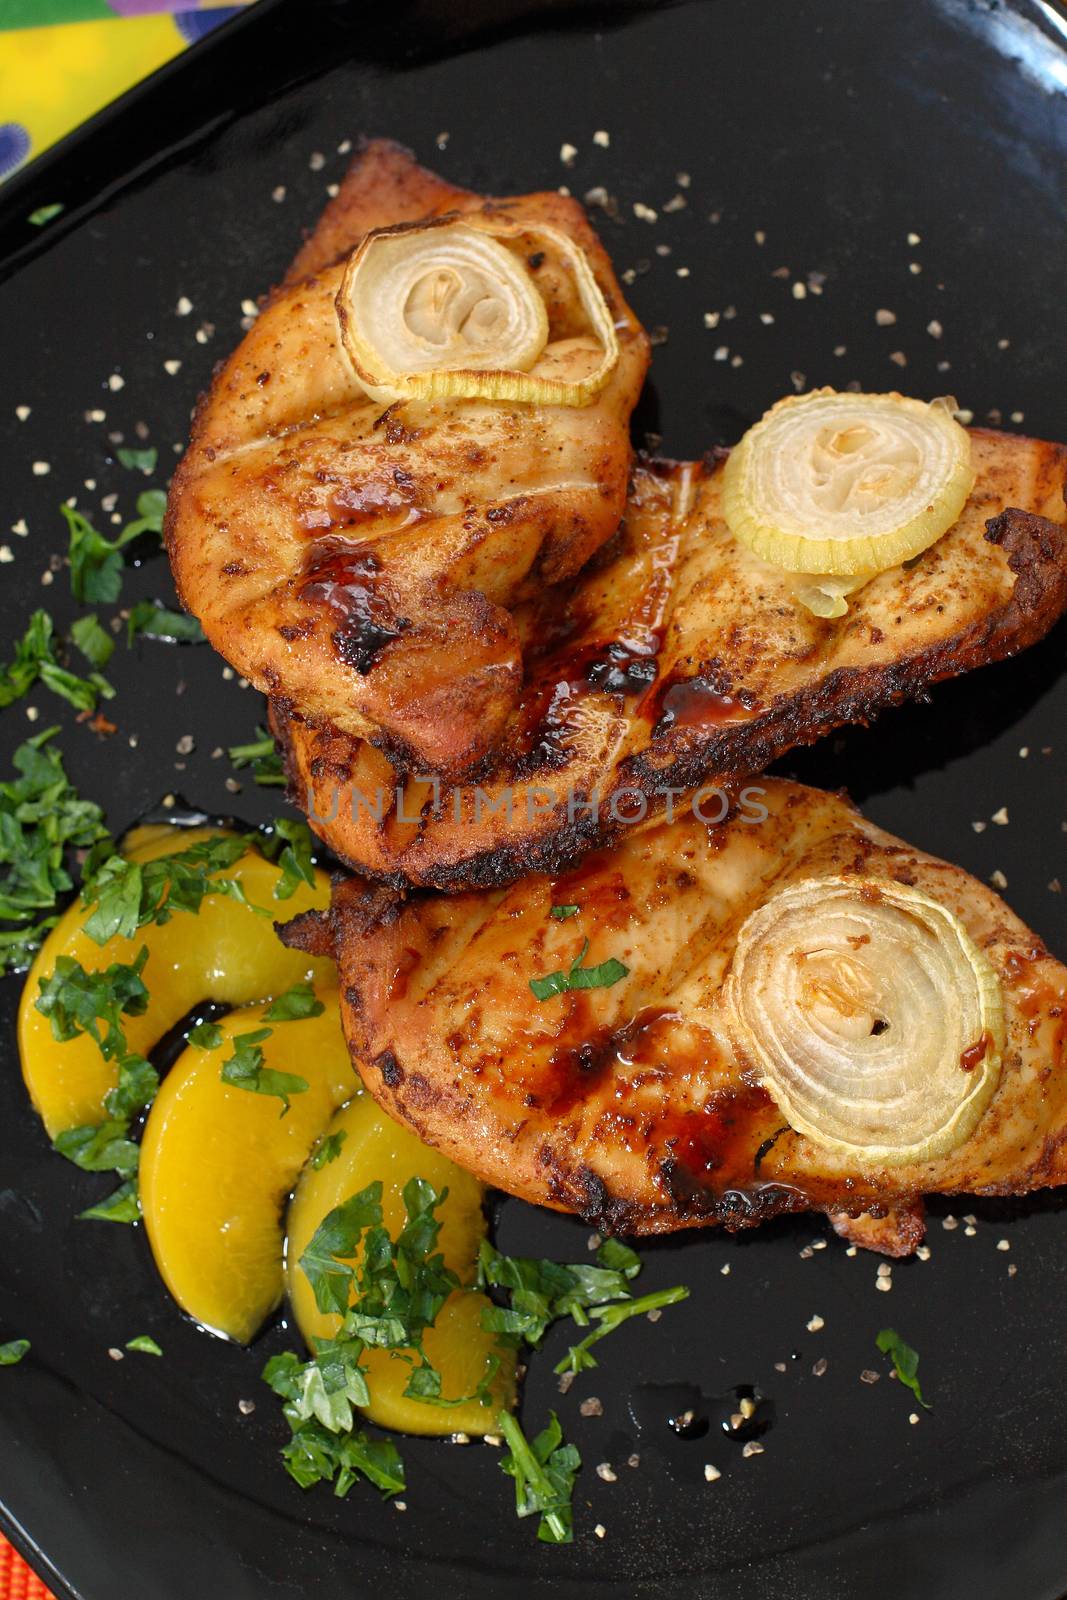 Grilled chicken fillet by robert_przybysz